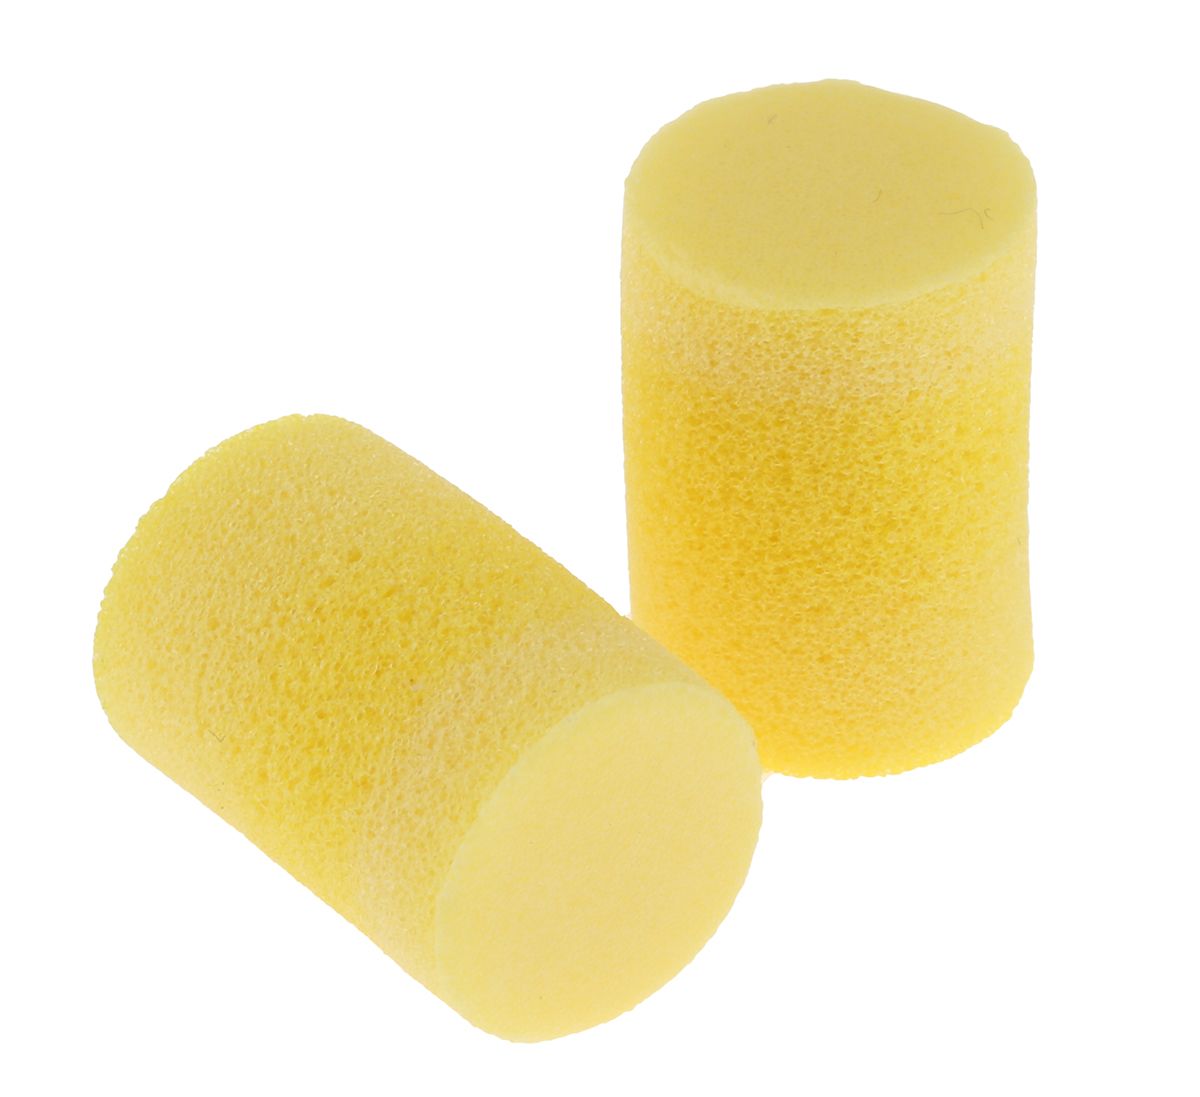 3M E.A.R Classic Uncorded Disposable Ear Plugs, 28dB, Yellow, 250 Pairs per Package